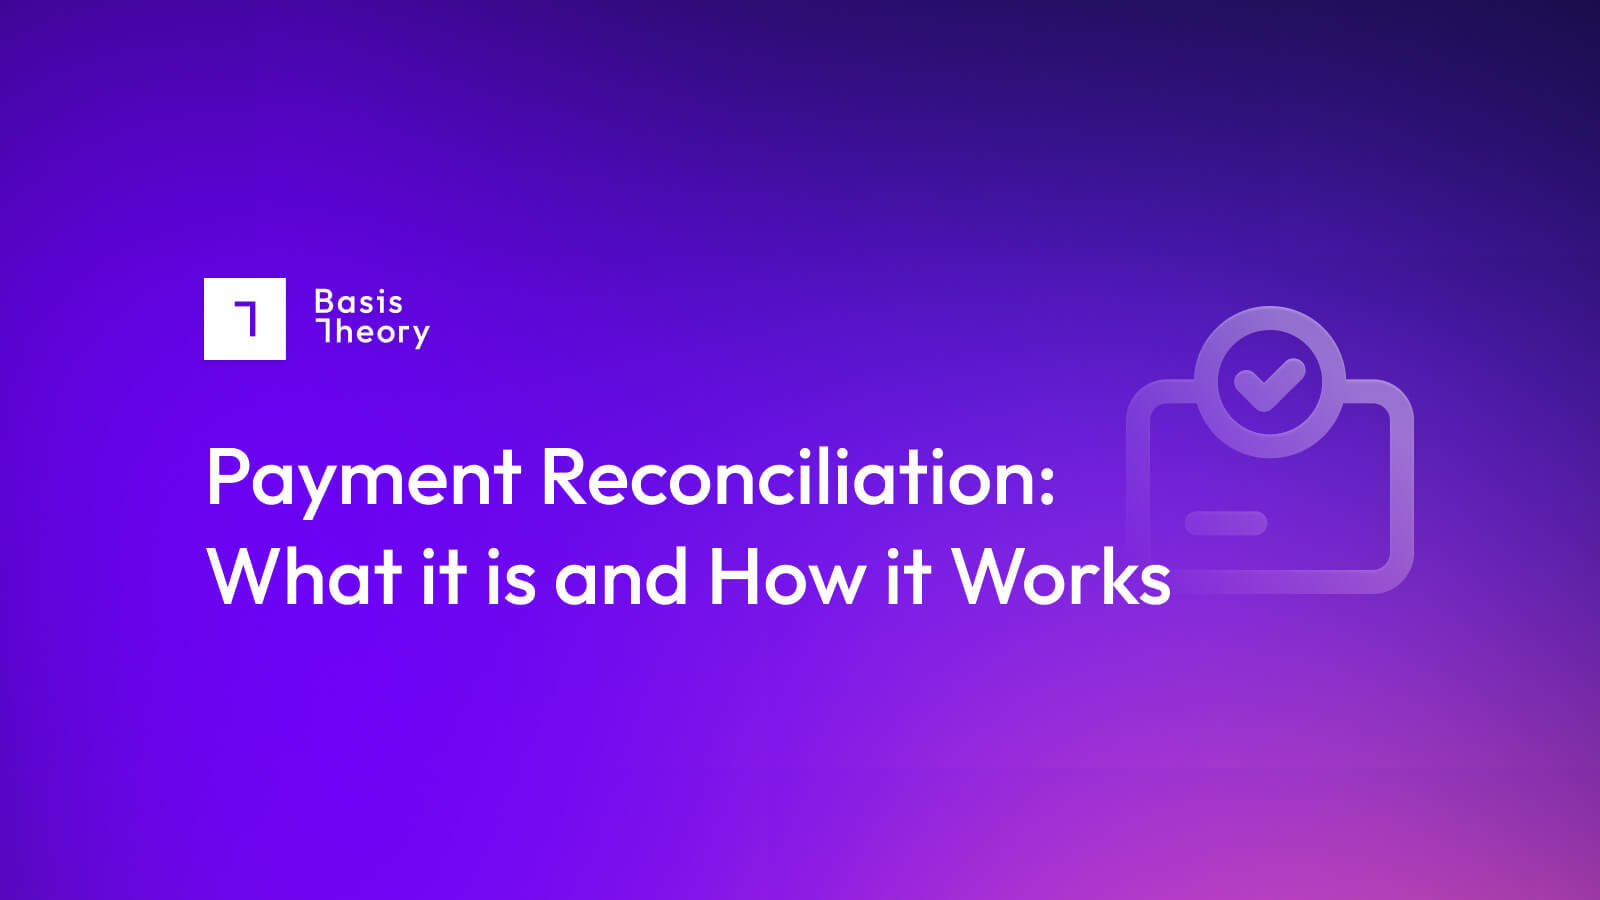 what is payment reconciliation and how does it work?